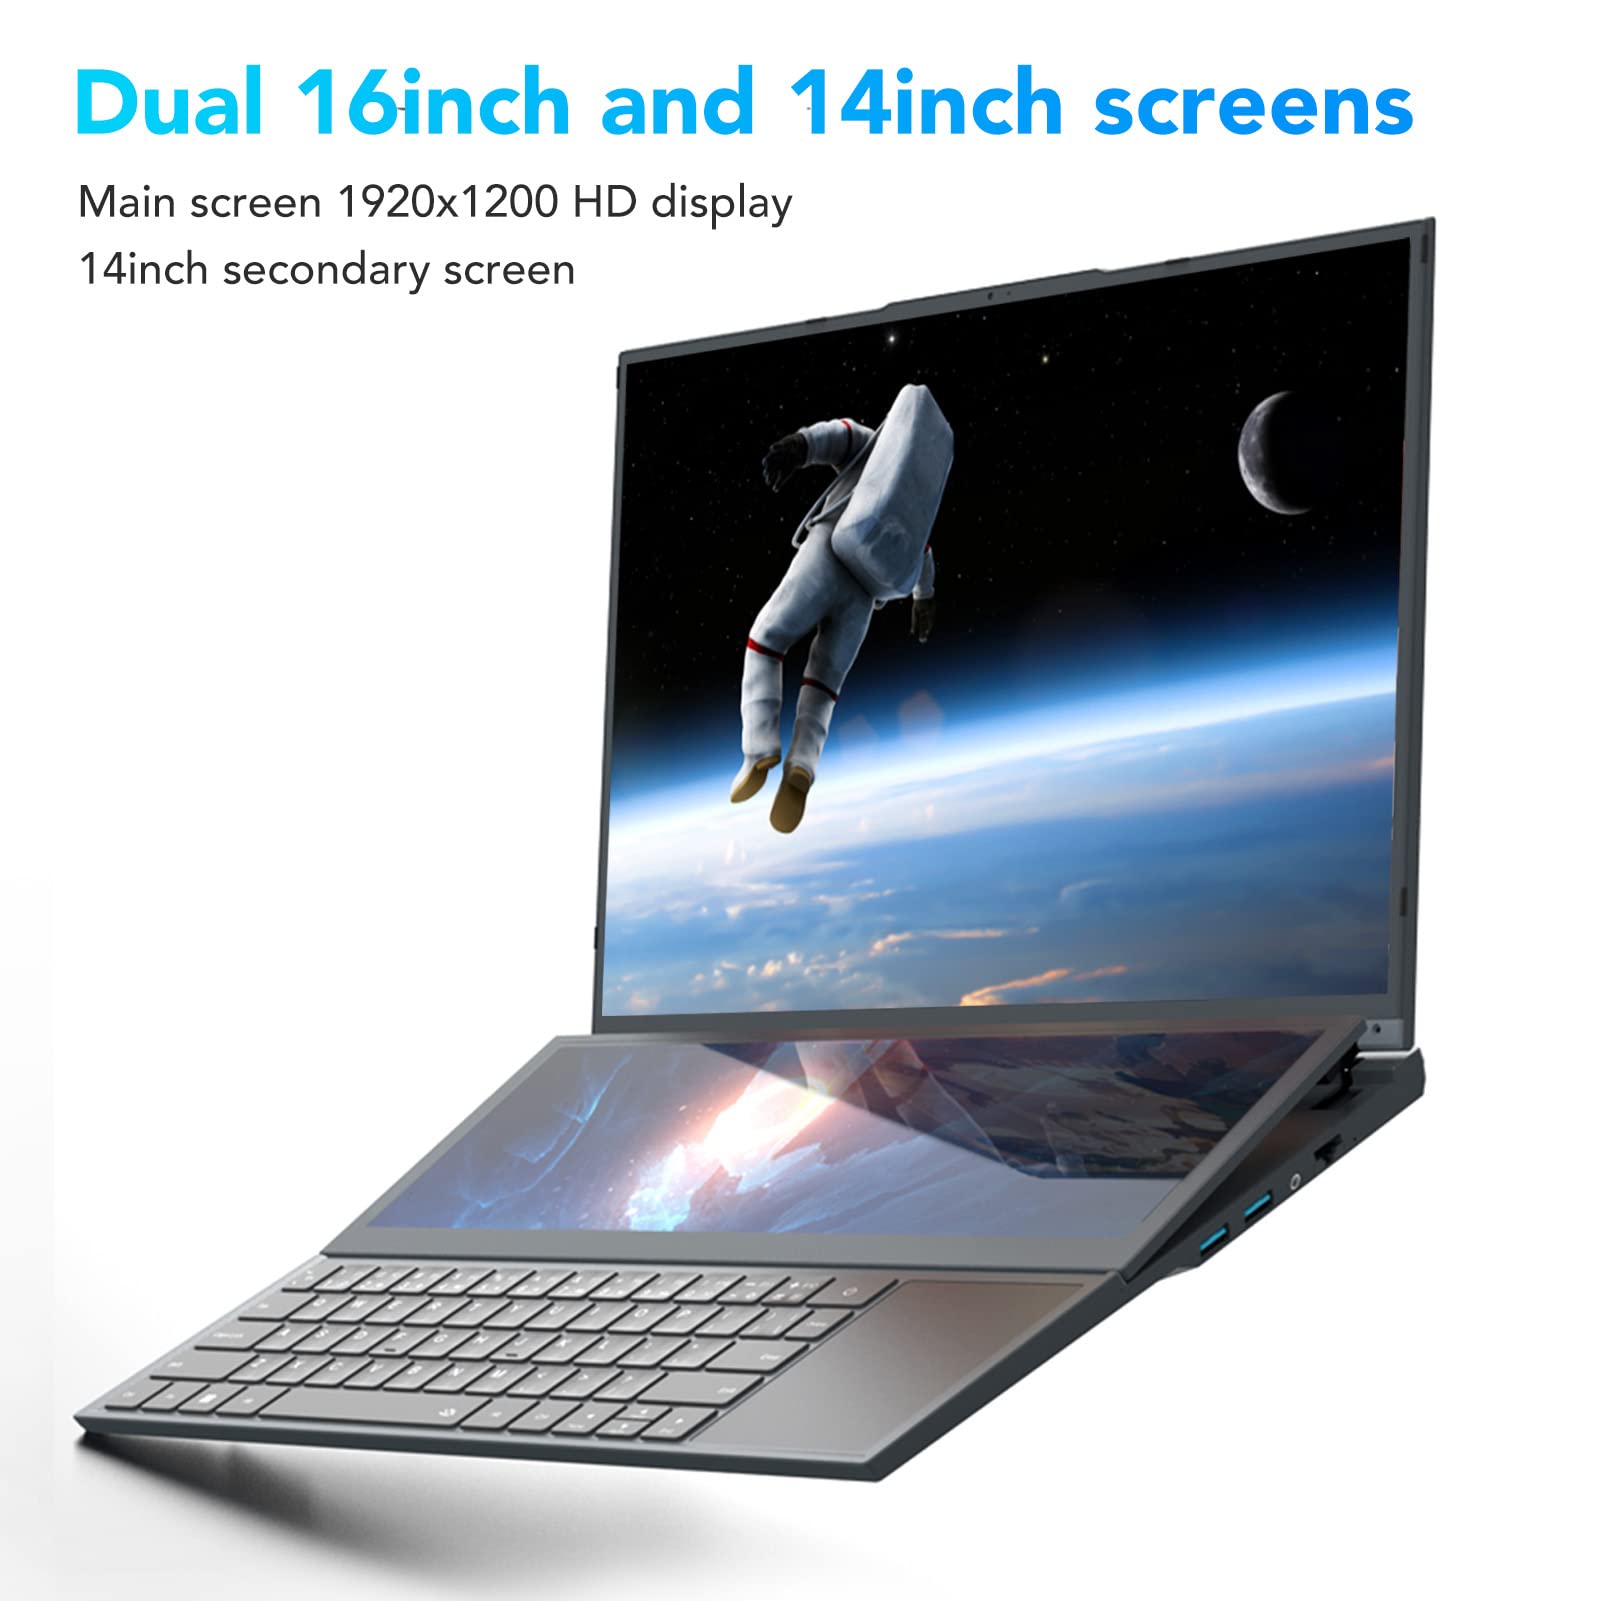 Acogedor 16in Dual Screen Laptop, 16inch HD Main Screen 14inch Touch Sub Screen Portable Gaming Laptop for Intel for Core i7 CPU, 16GB RAM 64GB ROM Dual Channel Memory, 13600mAh Battery